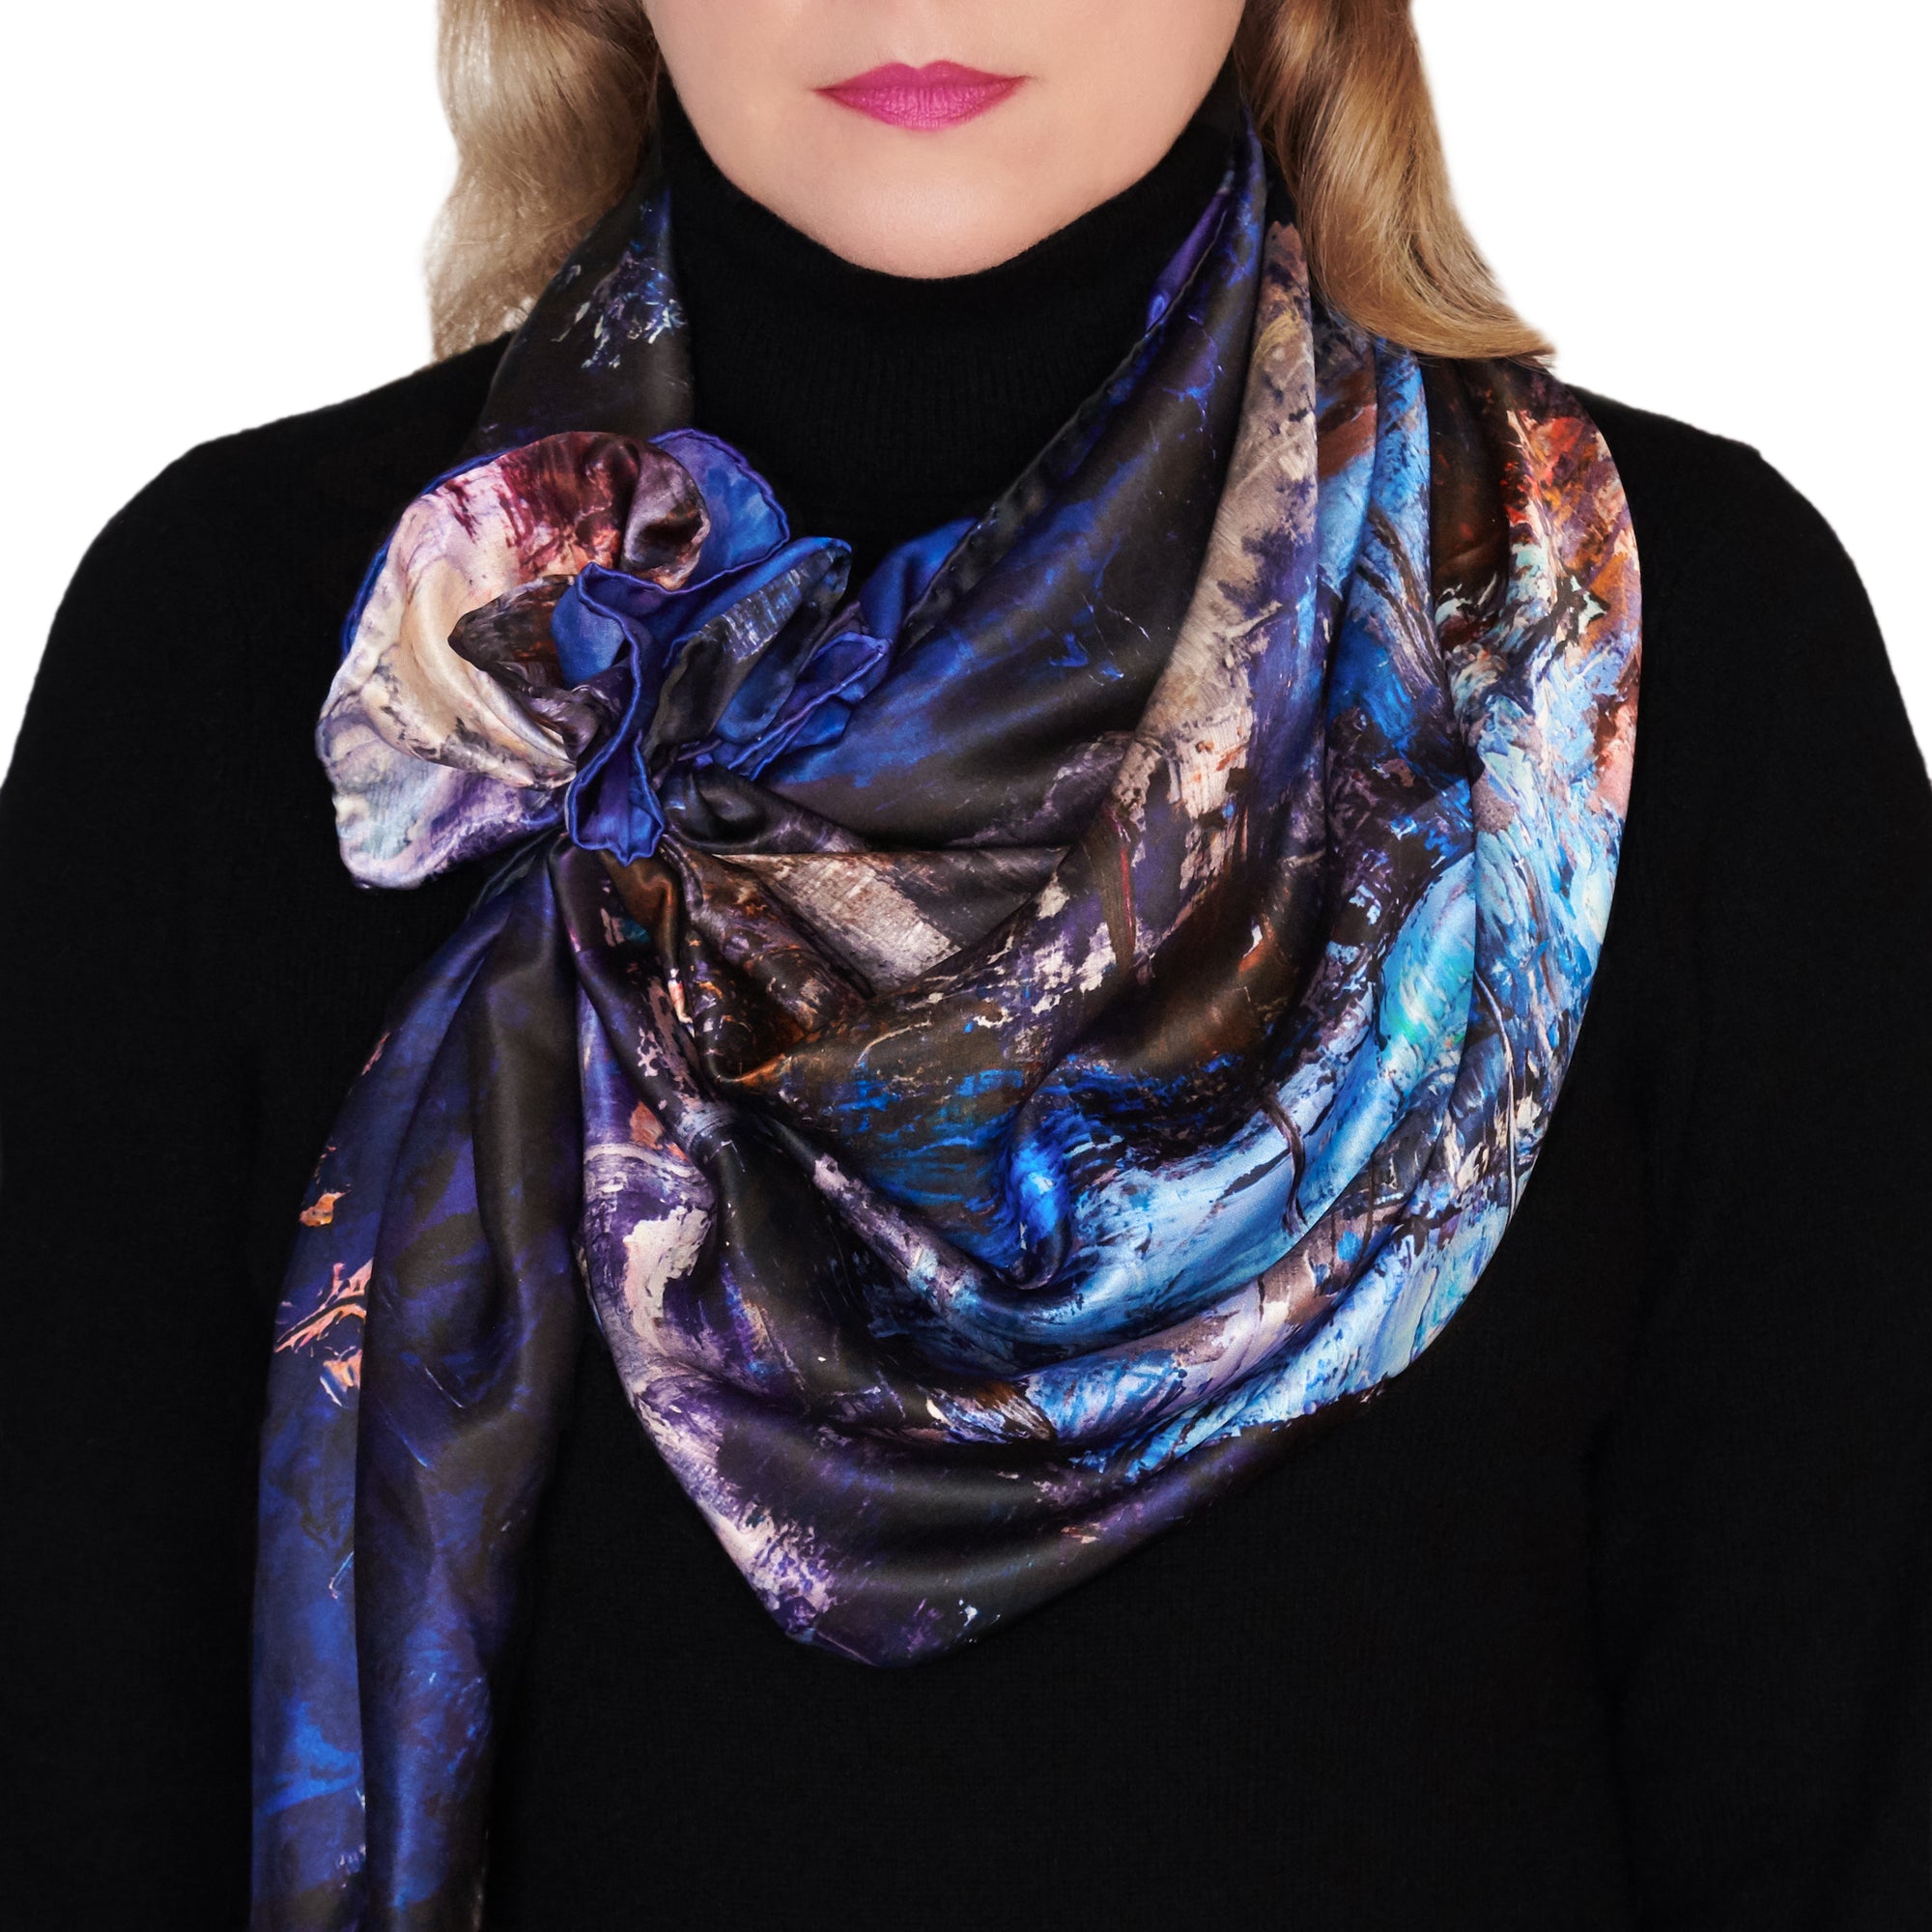 Lights of the City, 43-inch Square Italian Silk Scarf